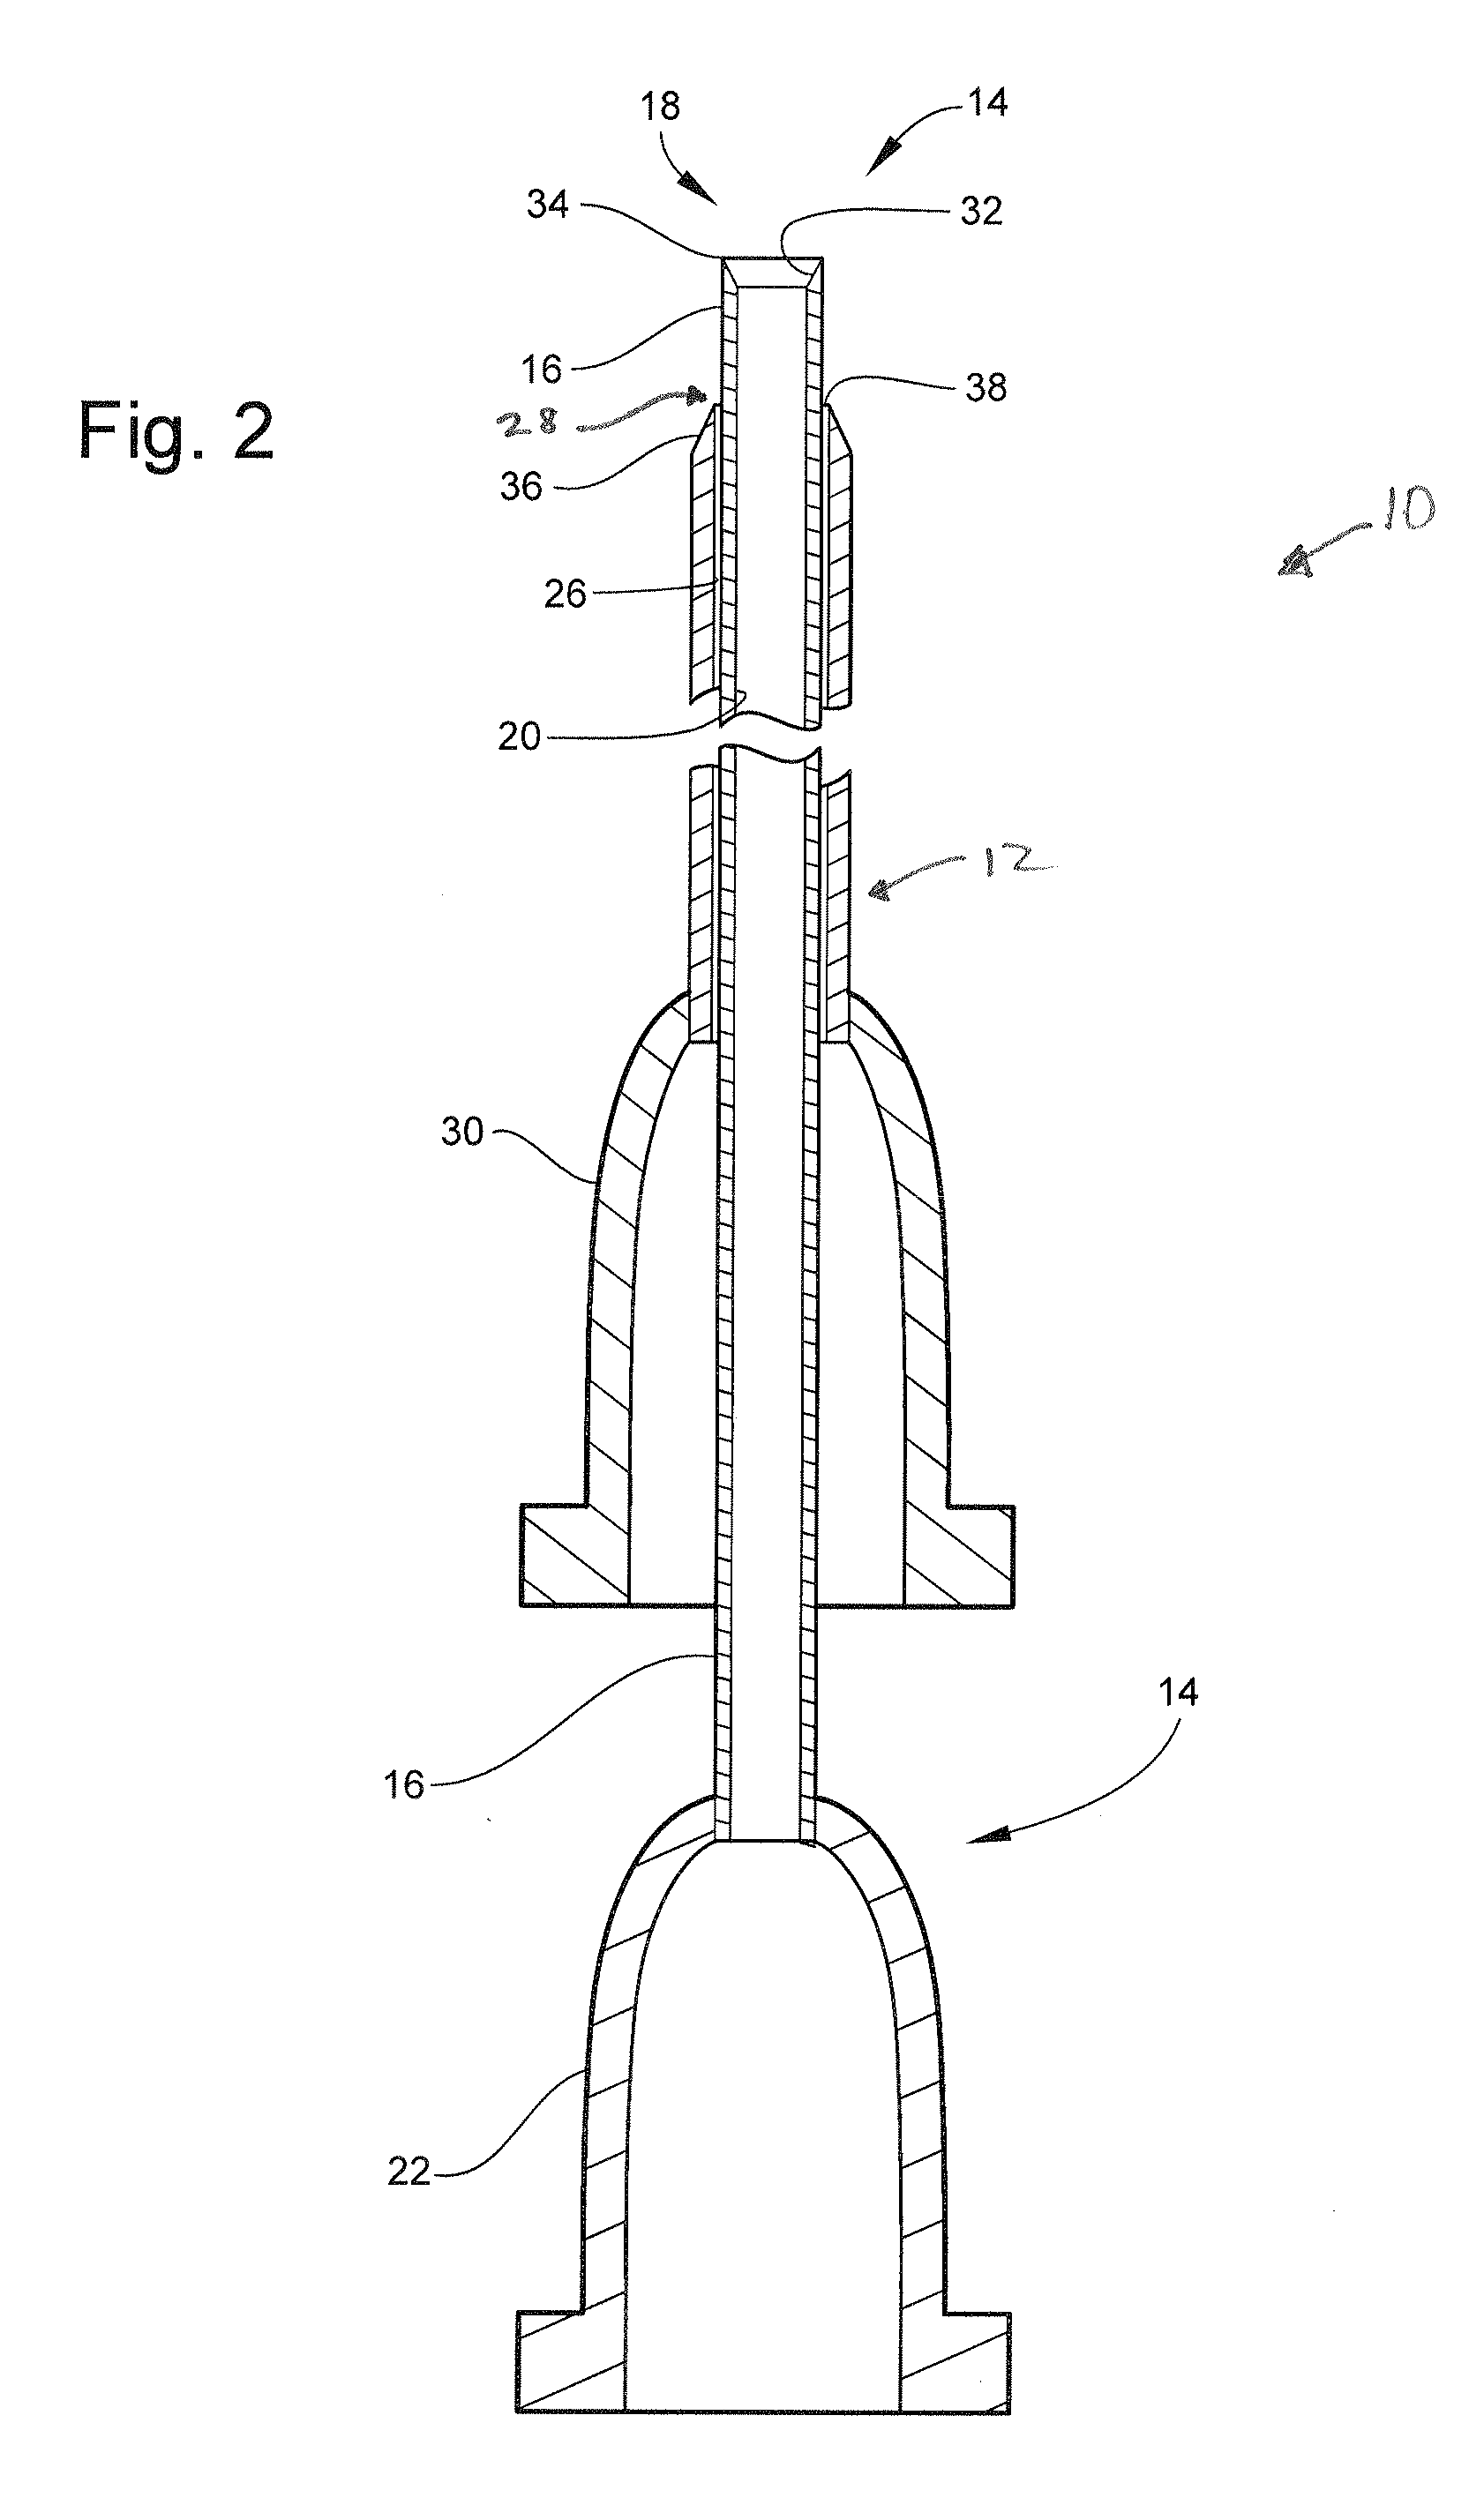 Fine needle biopsy system and method of use